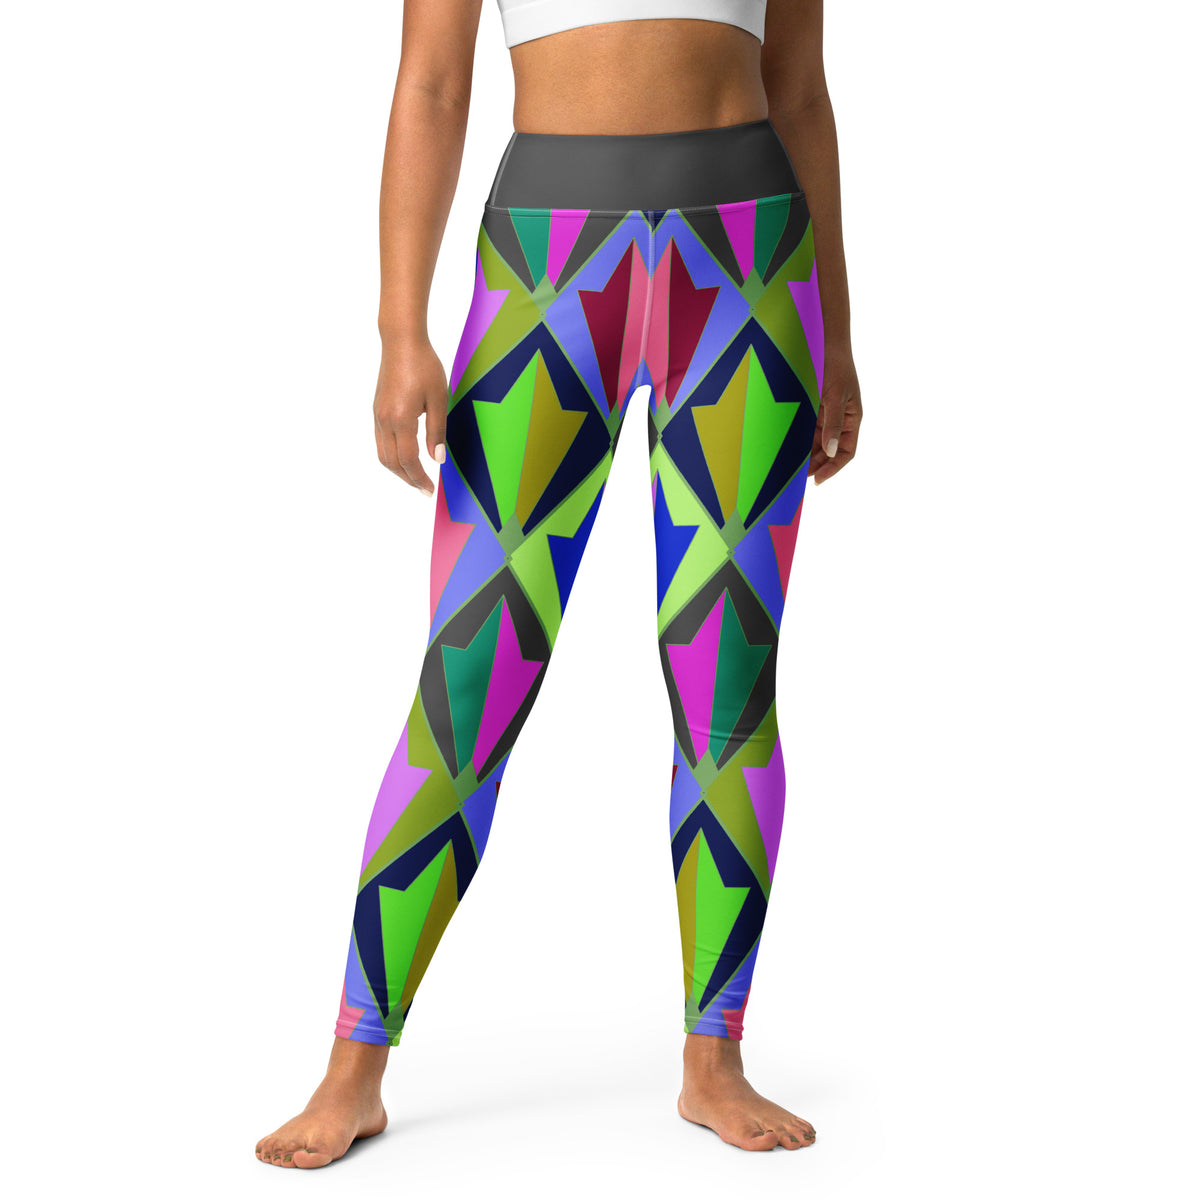 Ethereal Bloom All-Over Print Yoga Leggings on a clothing mannequin.